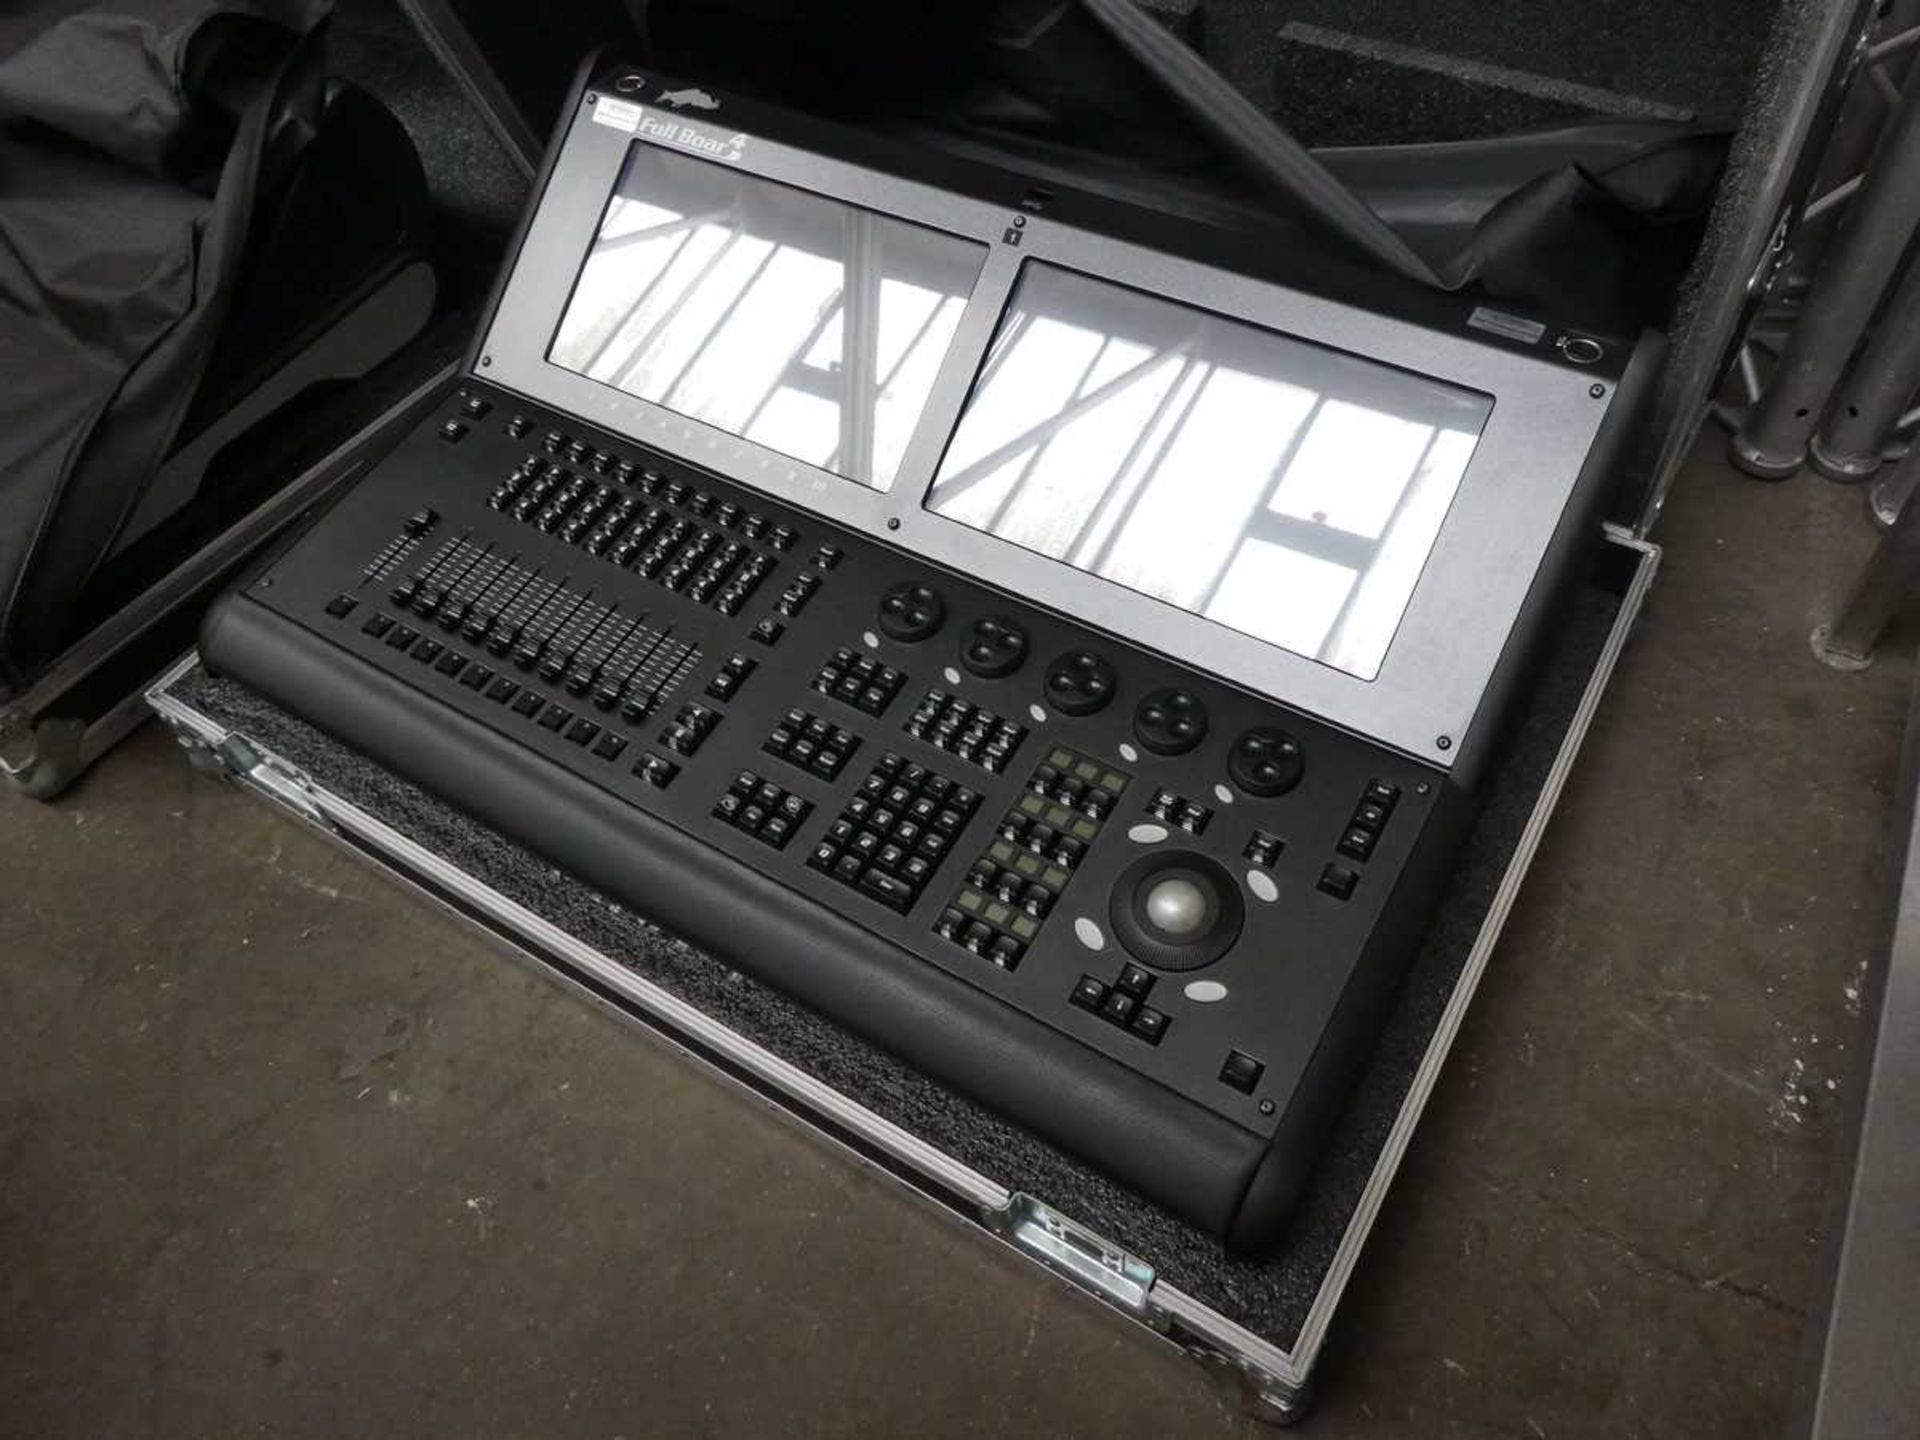 +VAT Hog Full Boar 4 DMX lighting console by High End Systems with 4x DMX outputs on rear panel,